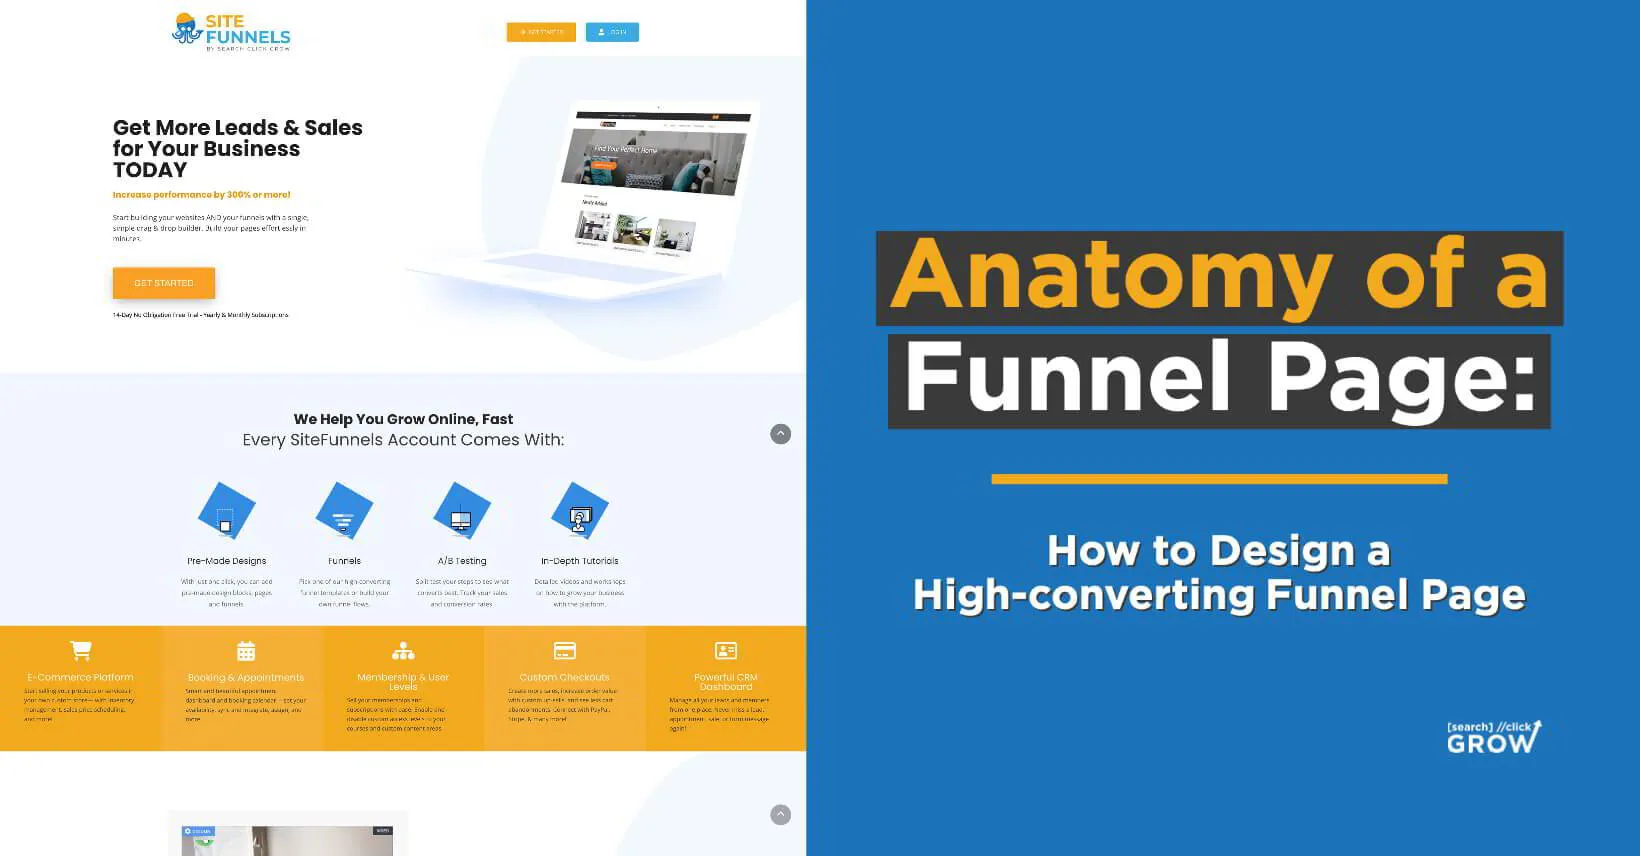 Anatomy of a Funnel Page: How to Design a High-converting Funnel Page